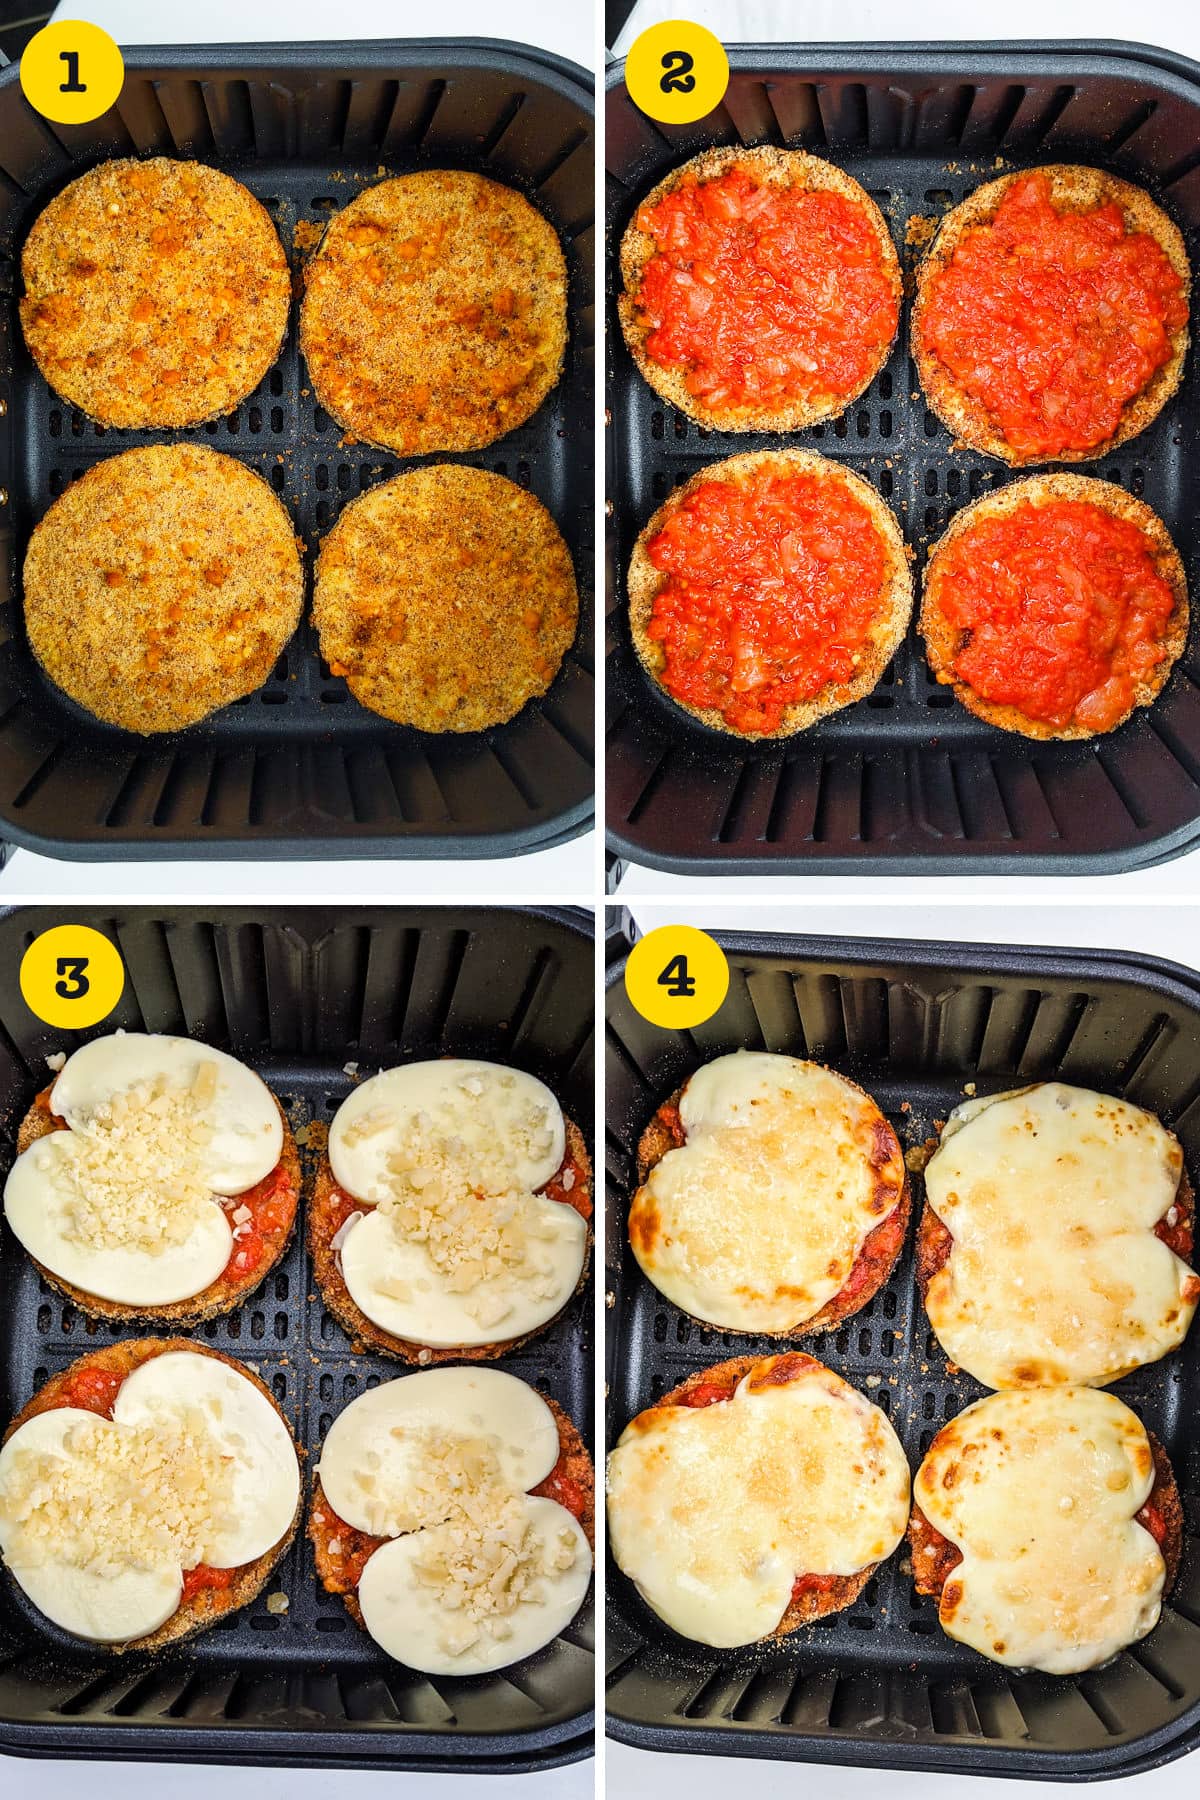 Step-by-step how to add ingredients for the air fryer eggplant parmesan and mozzarella.